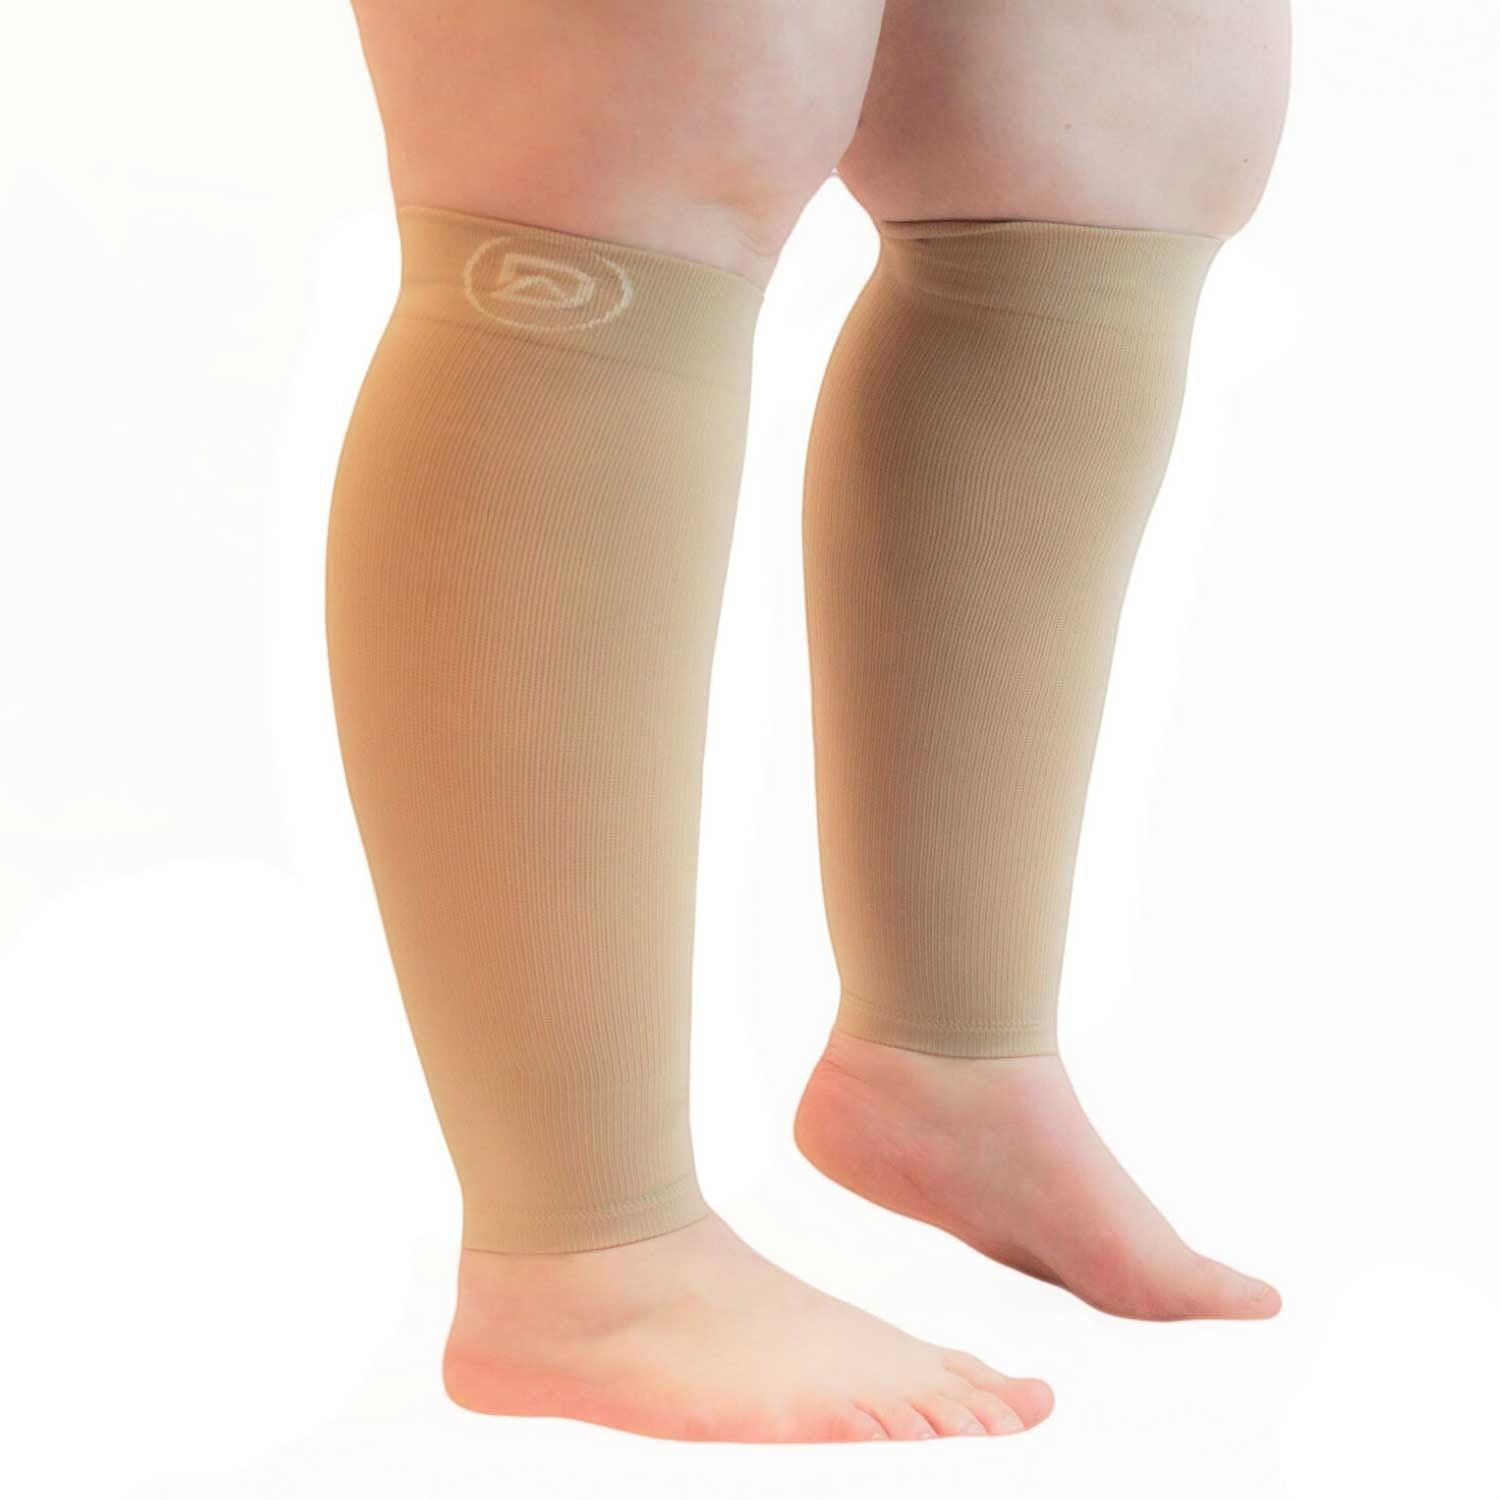 1 pair) plus size compression socks wide calf 20-30 mmHg for women and men  - SAMA DILIGENCE